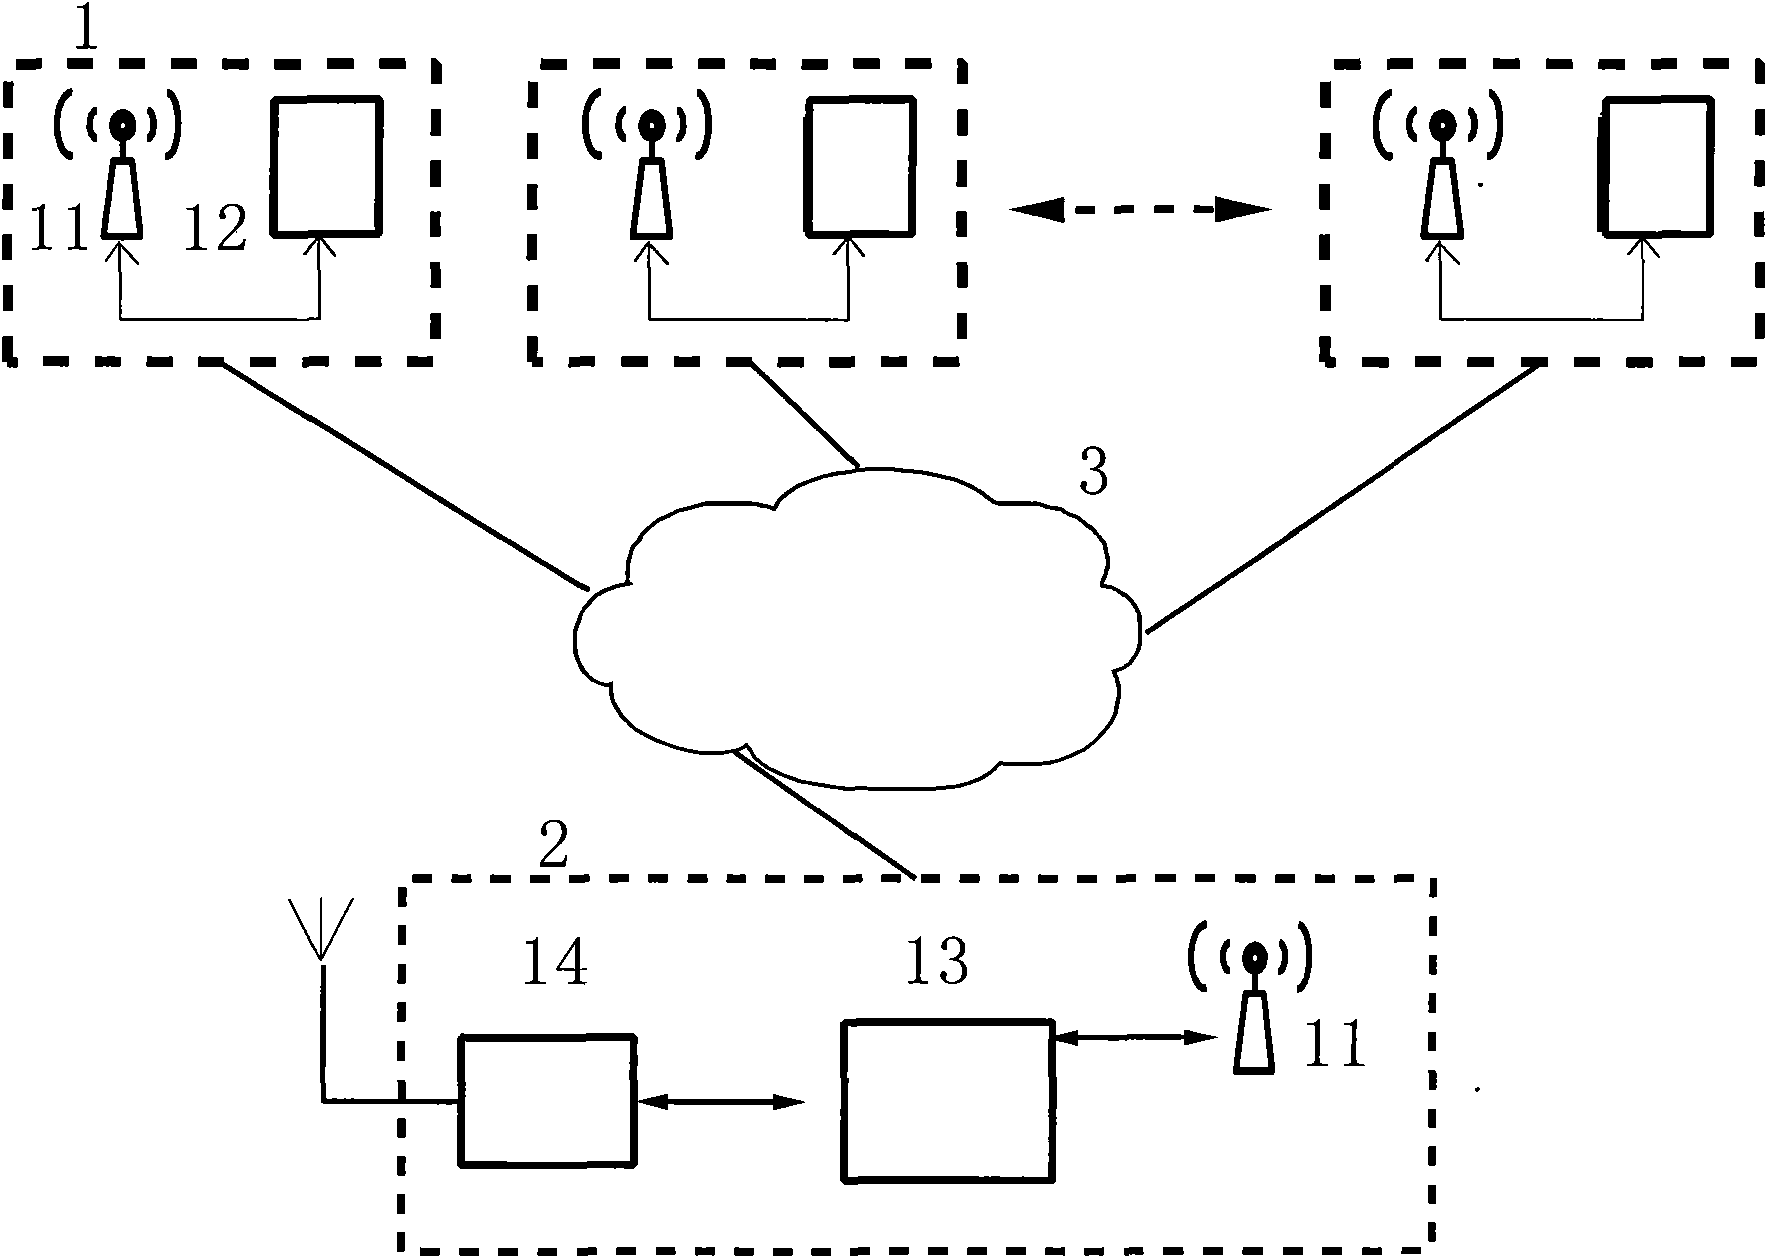 Monitoring and processing system for operating environment of electrical equipment